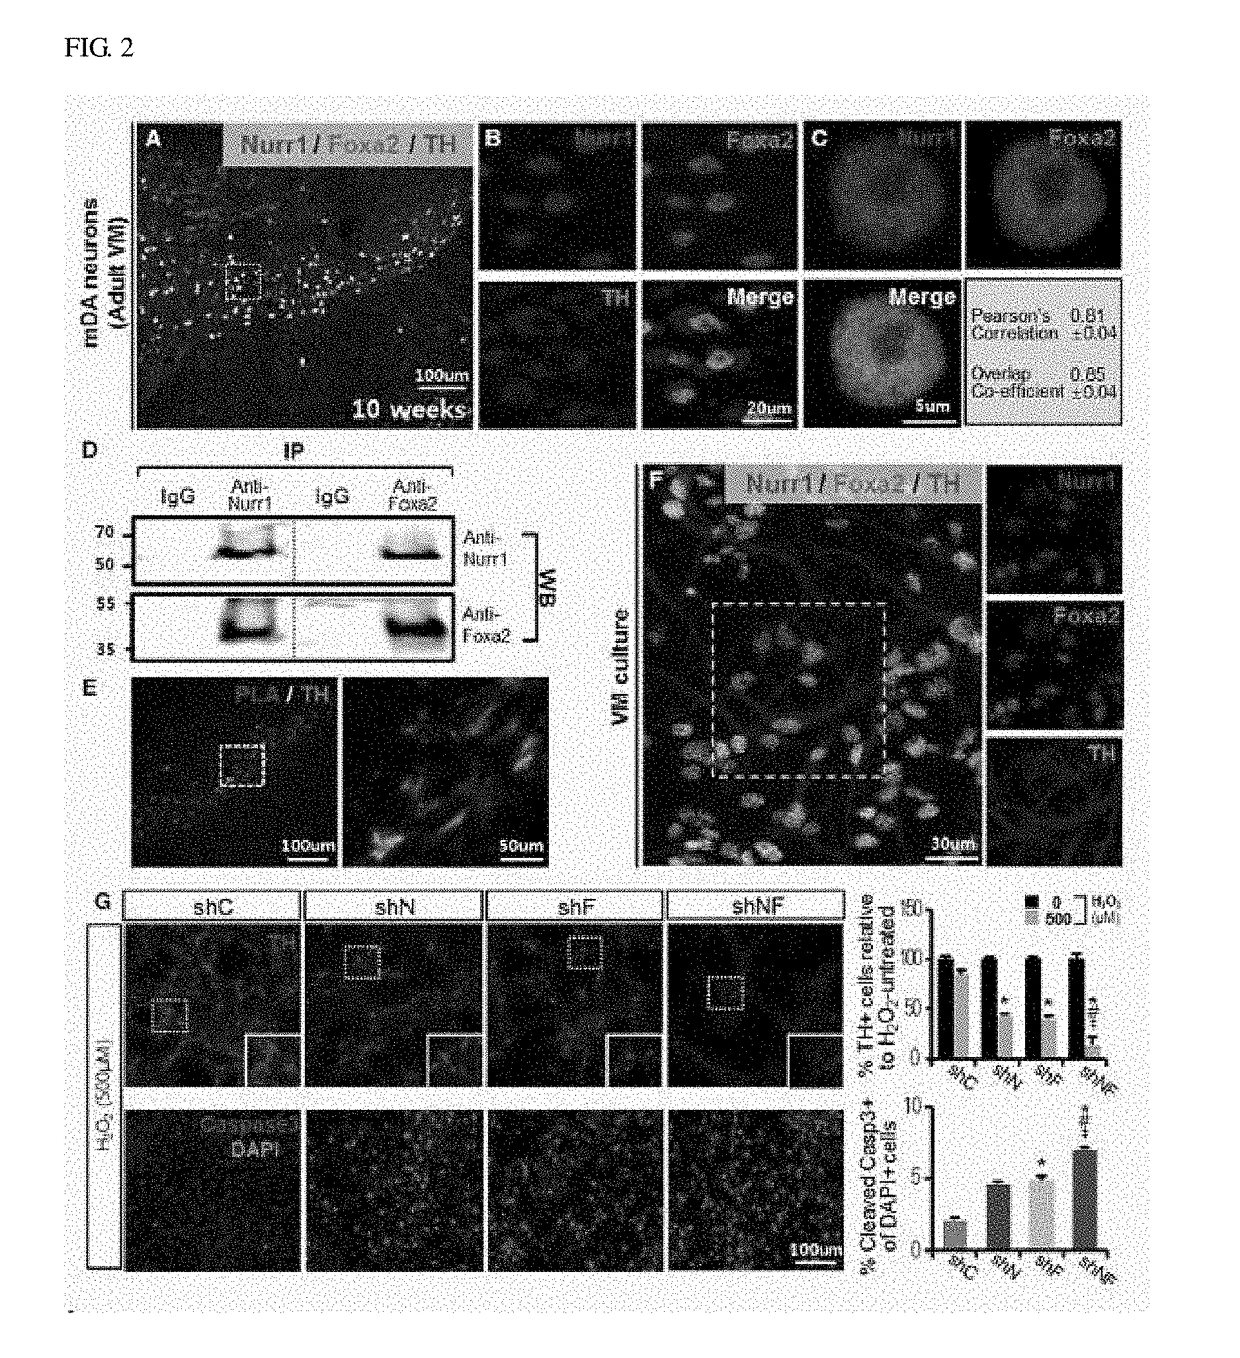 Therapeutic effects of nurr1 and foxa2 in inflammatory neurologic disorders by m1-to-m2 polarization of glial cells